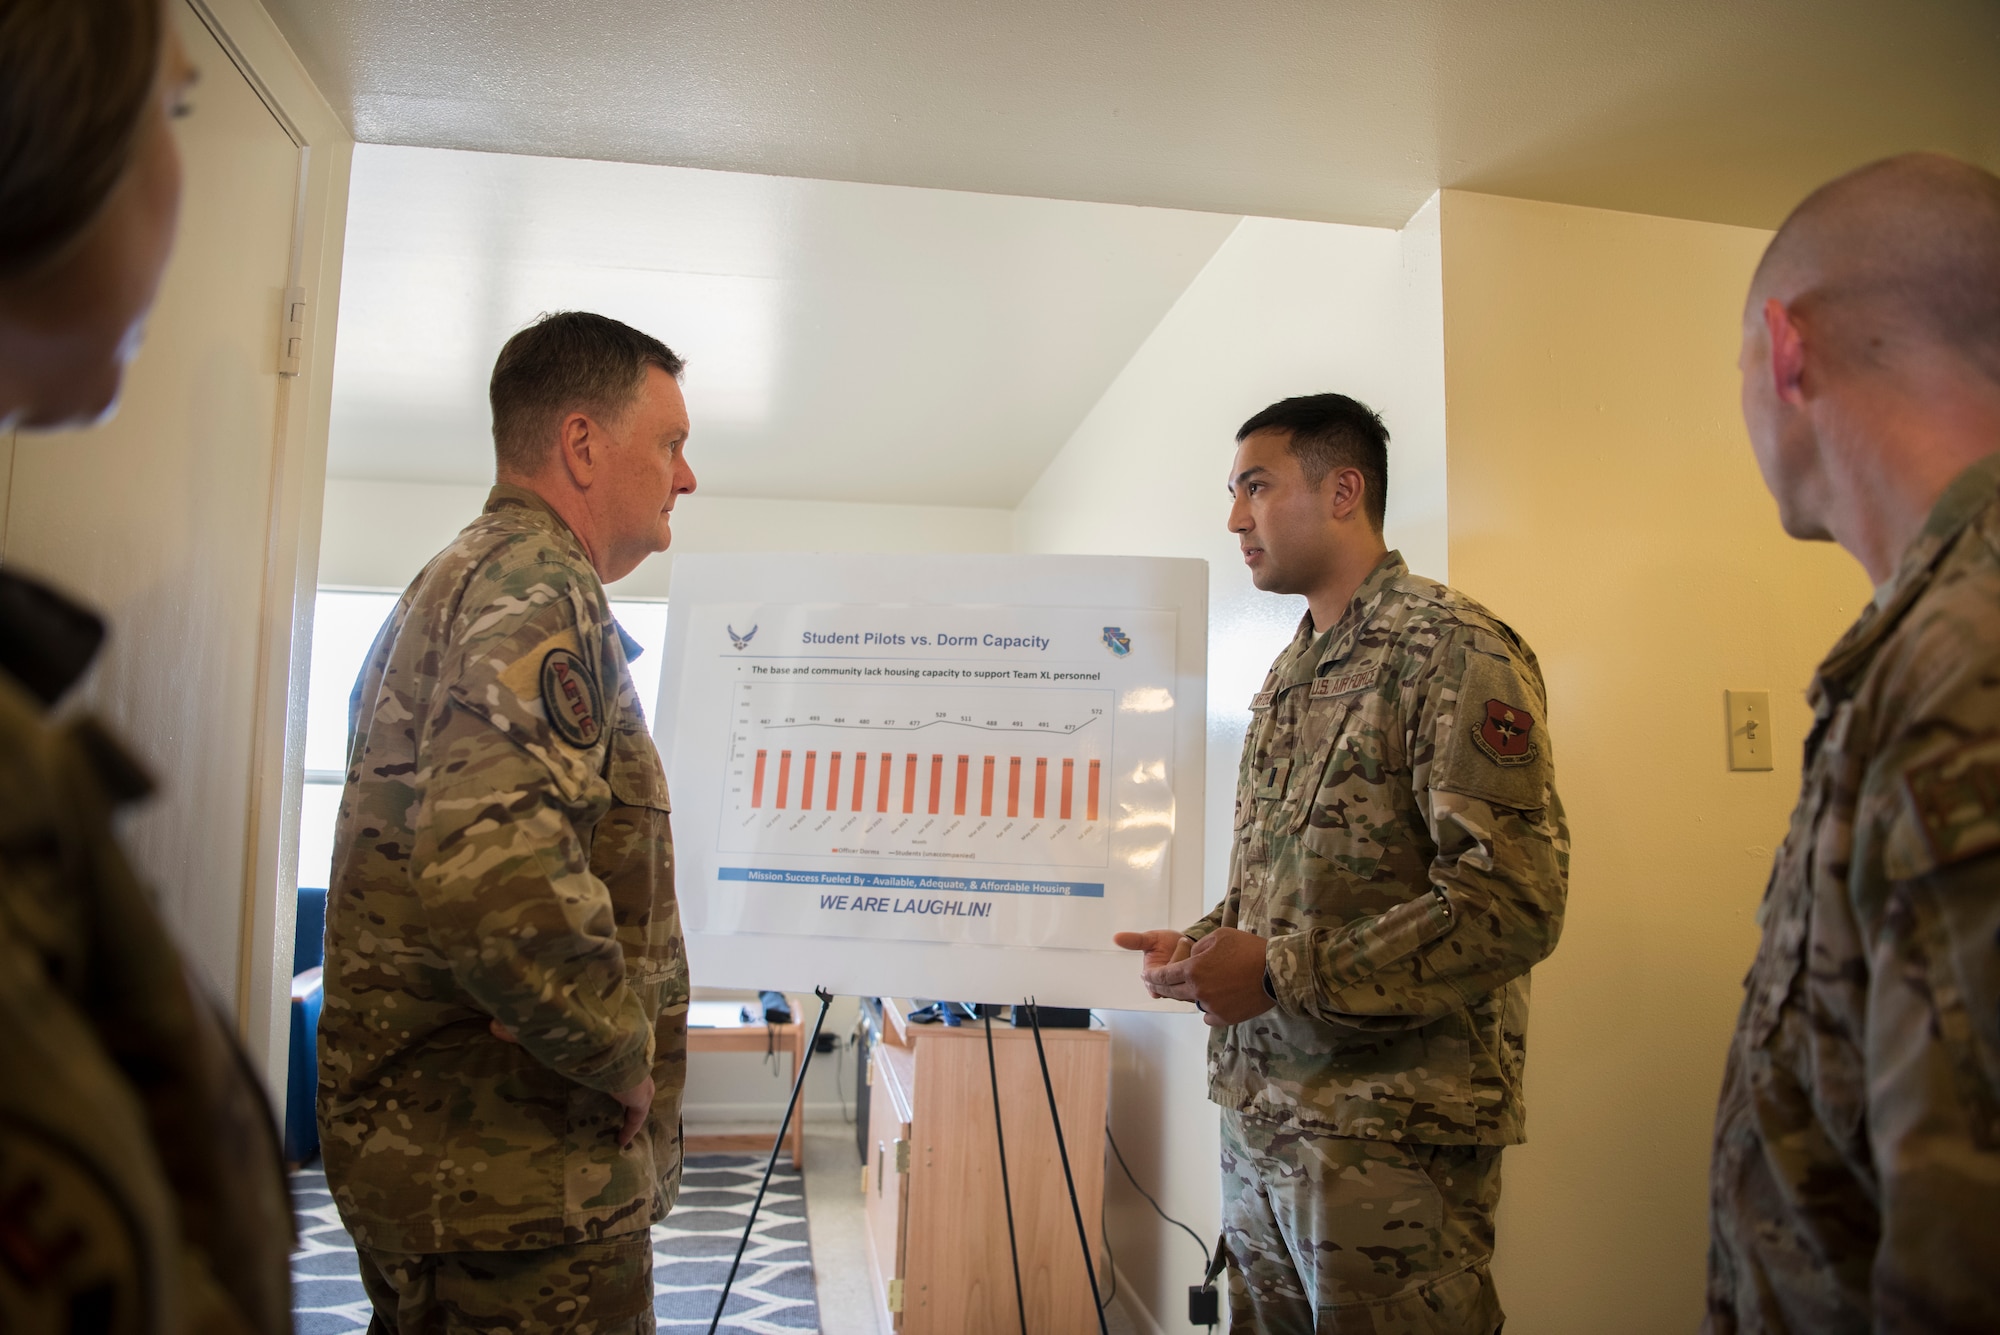 First Lt. Karson Gabriel Artero, 47th Civil Engineer Squadron installation management flight deputy, briefs Lt. Gen. Brad Webb, commander of Air Education and Training Command (AETC), on a current housing problem Laughlin is facing, Aug. 14, 2019, Laughlin Air Force Base, Texas. With plans to boost pilot production, Laughlin is coming up with ways to house all the extra personnel that could be soon be stationed here. (U.S. Air Force photo by Staff Sgt. Benjamin N. Valmoja).